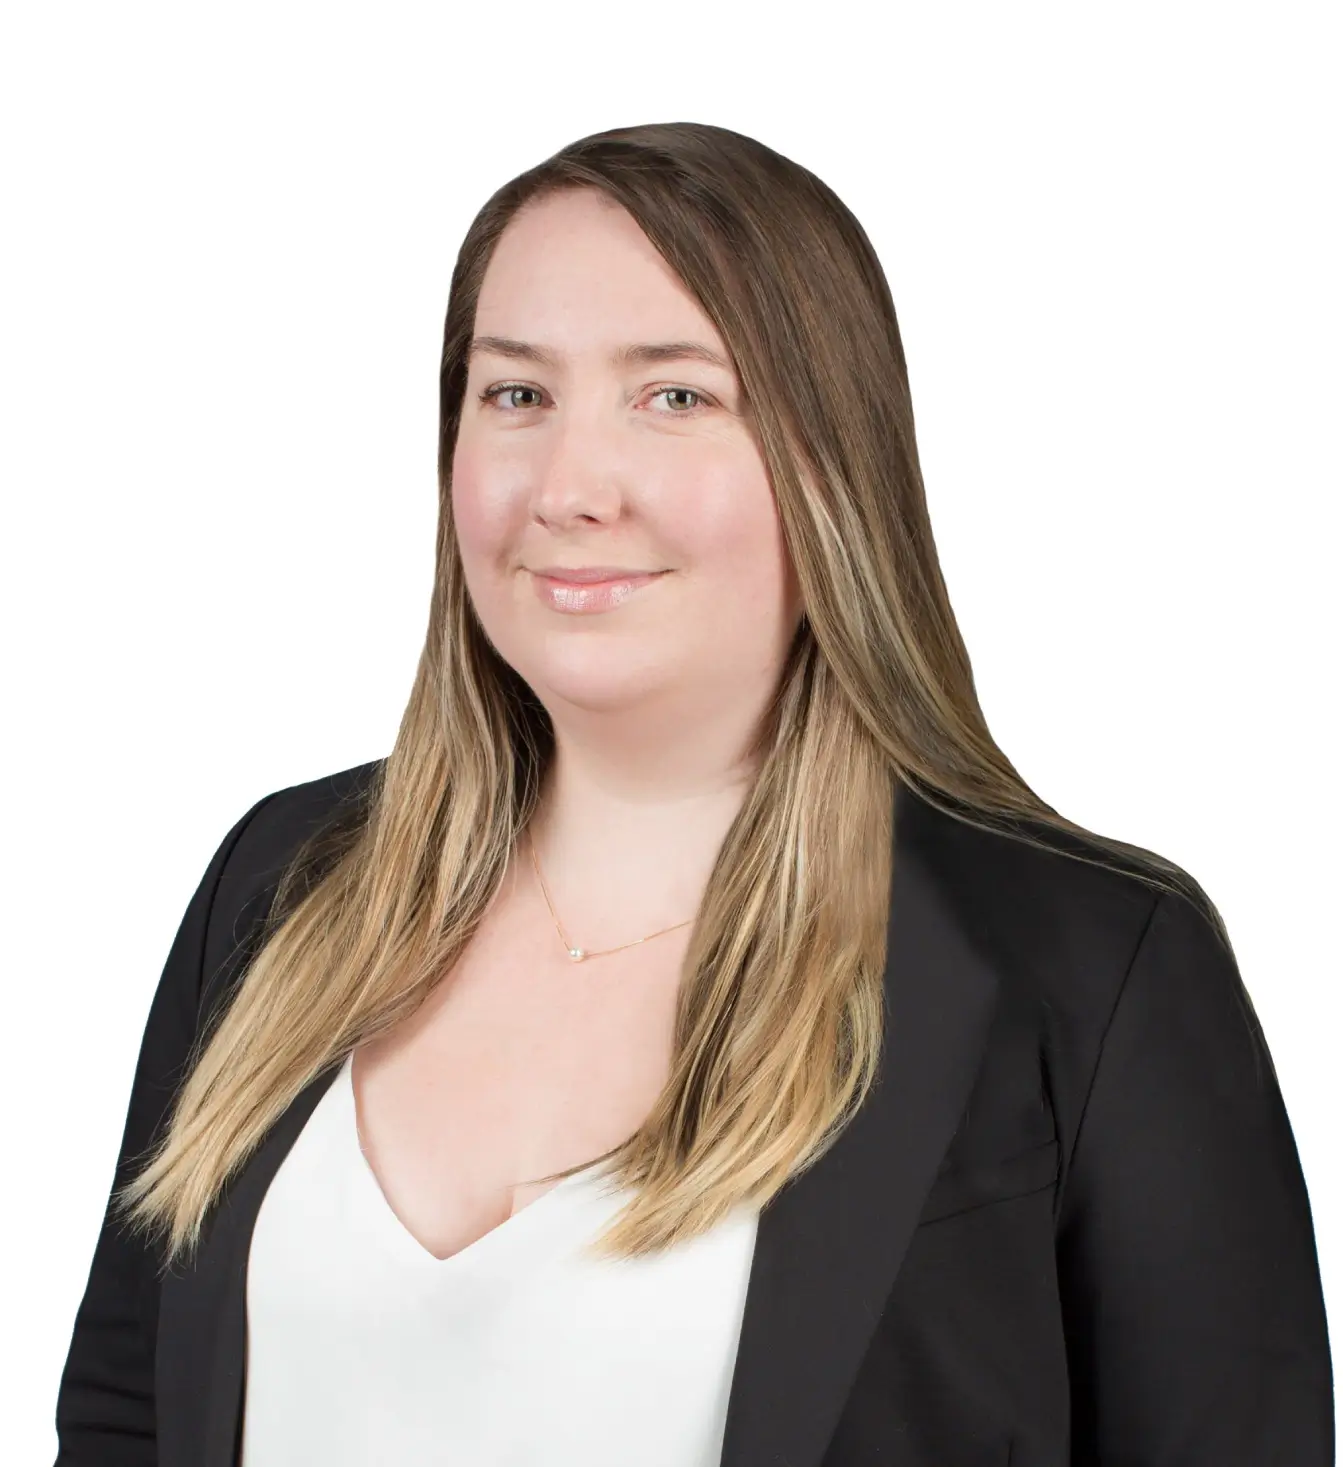 Meet our new articling student, Gillian Mactaggart!